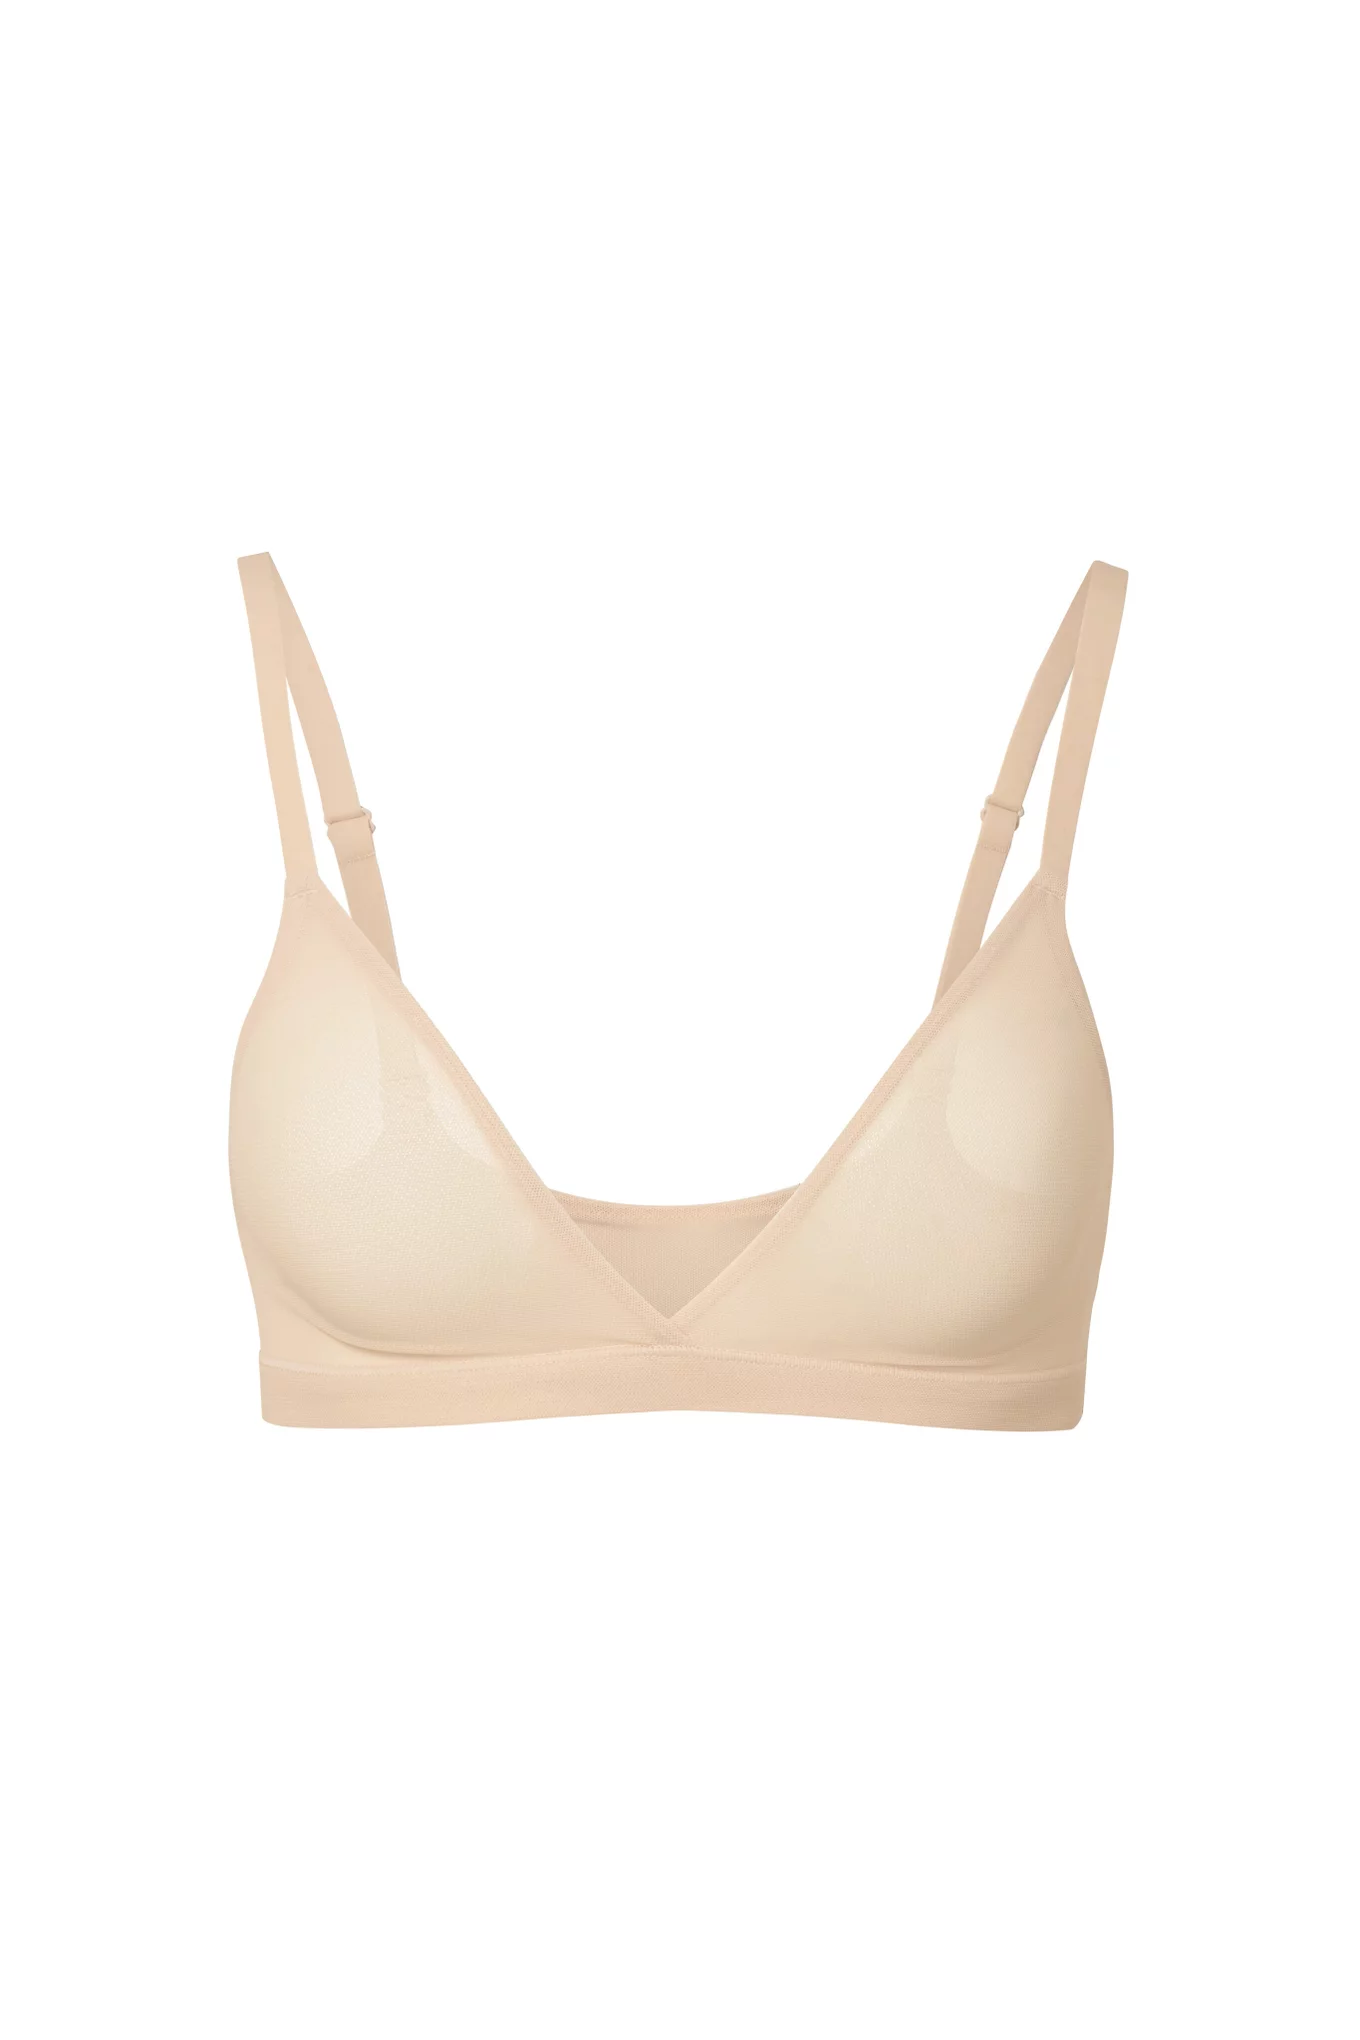 FITS EVERYBODY UNLINED DEMI BRA